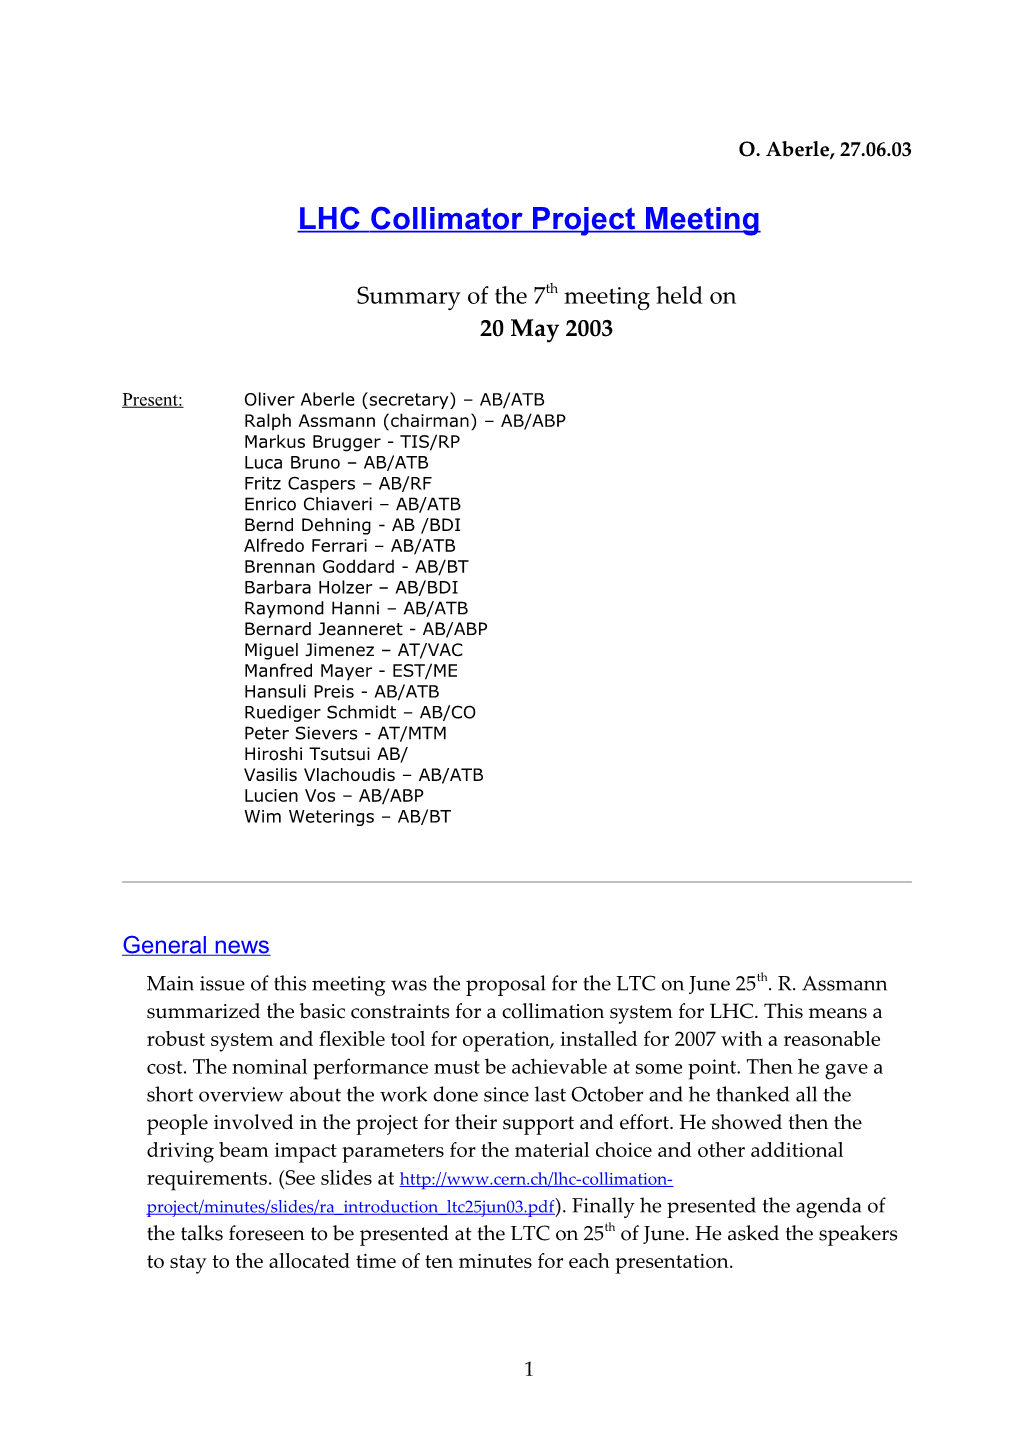 LHC Collimator Project Team Meeting